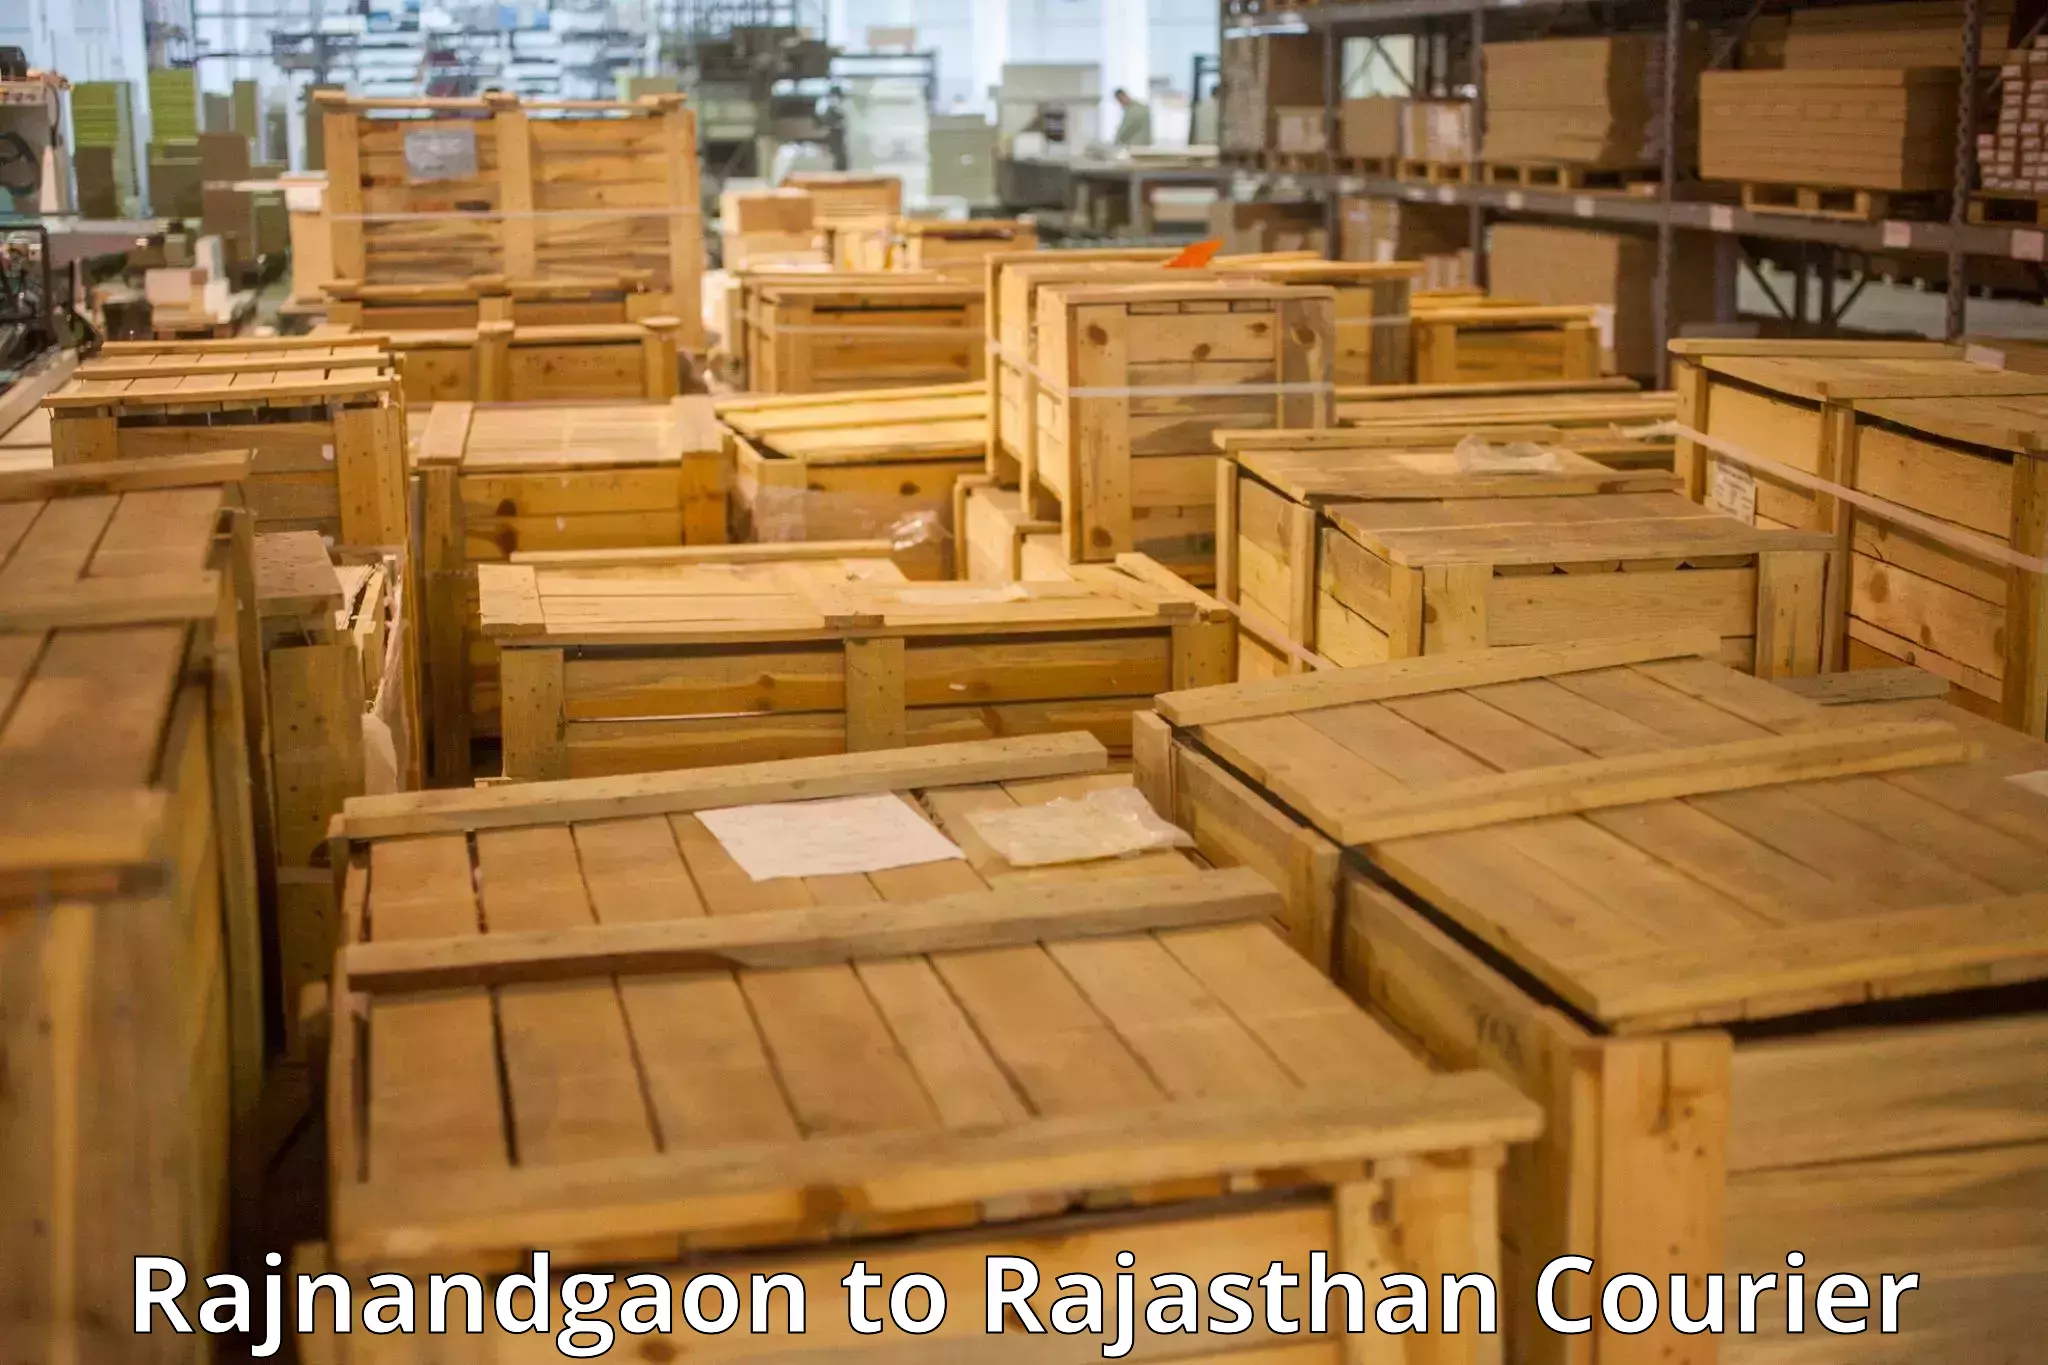 Luggage shipment specialists Rajnandgaon to Yeswanthapur